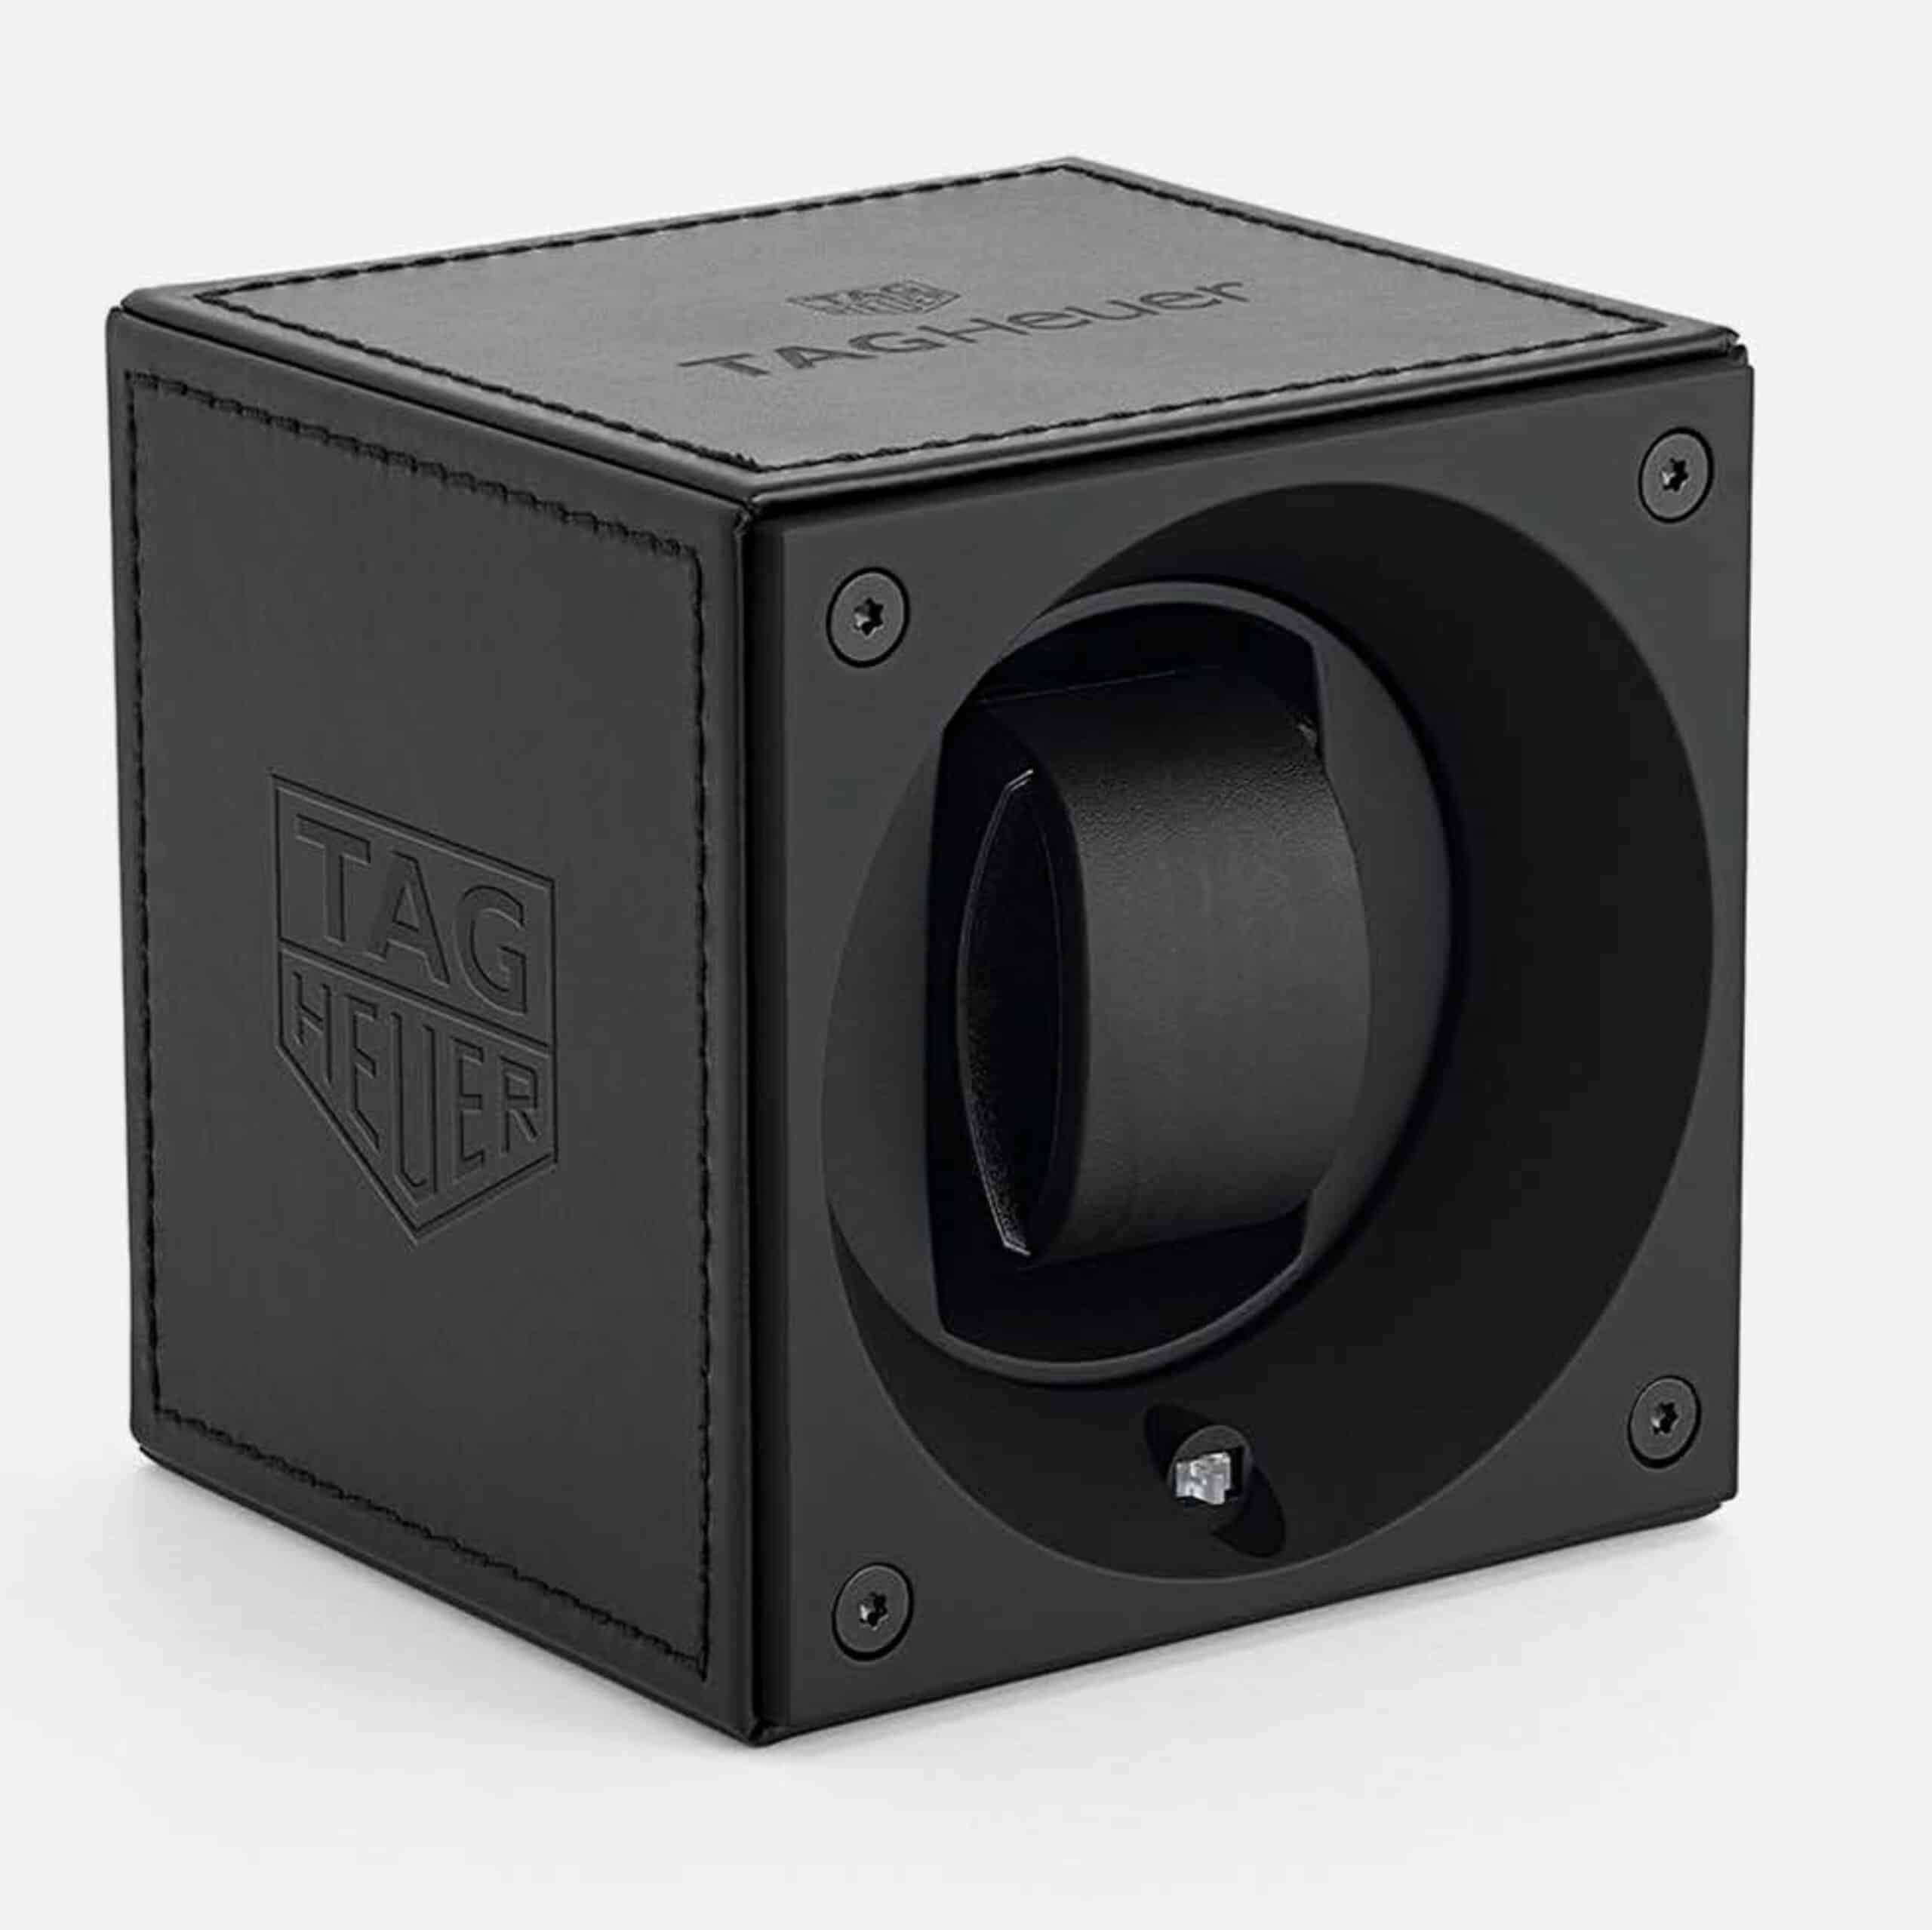 MASTERBOX FOR TAG HEUER